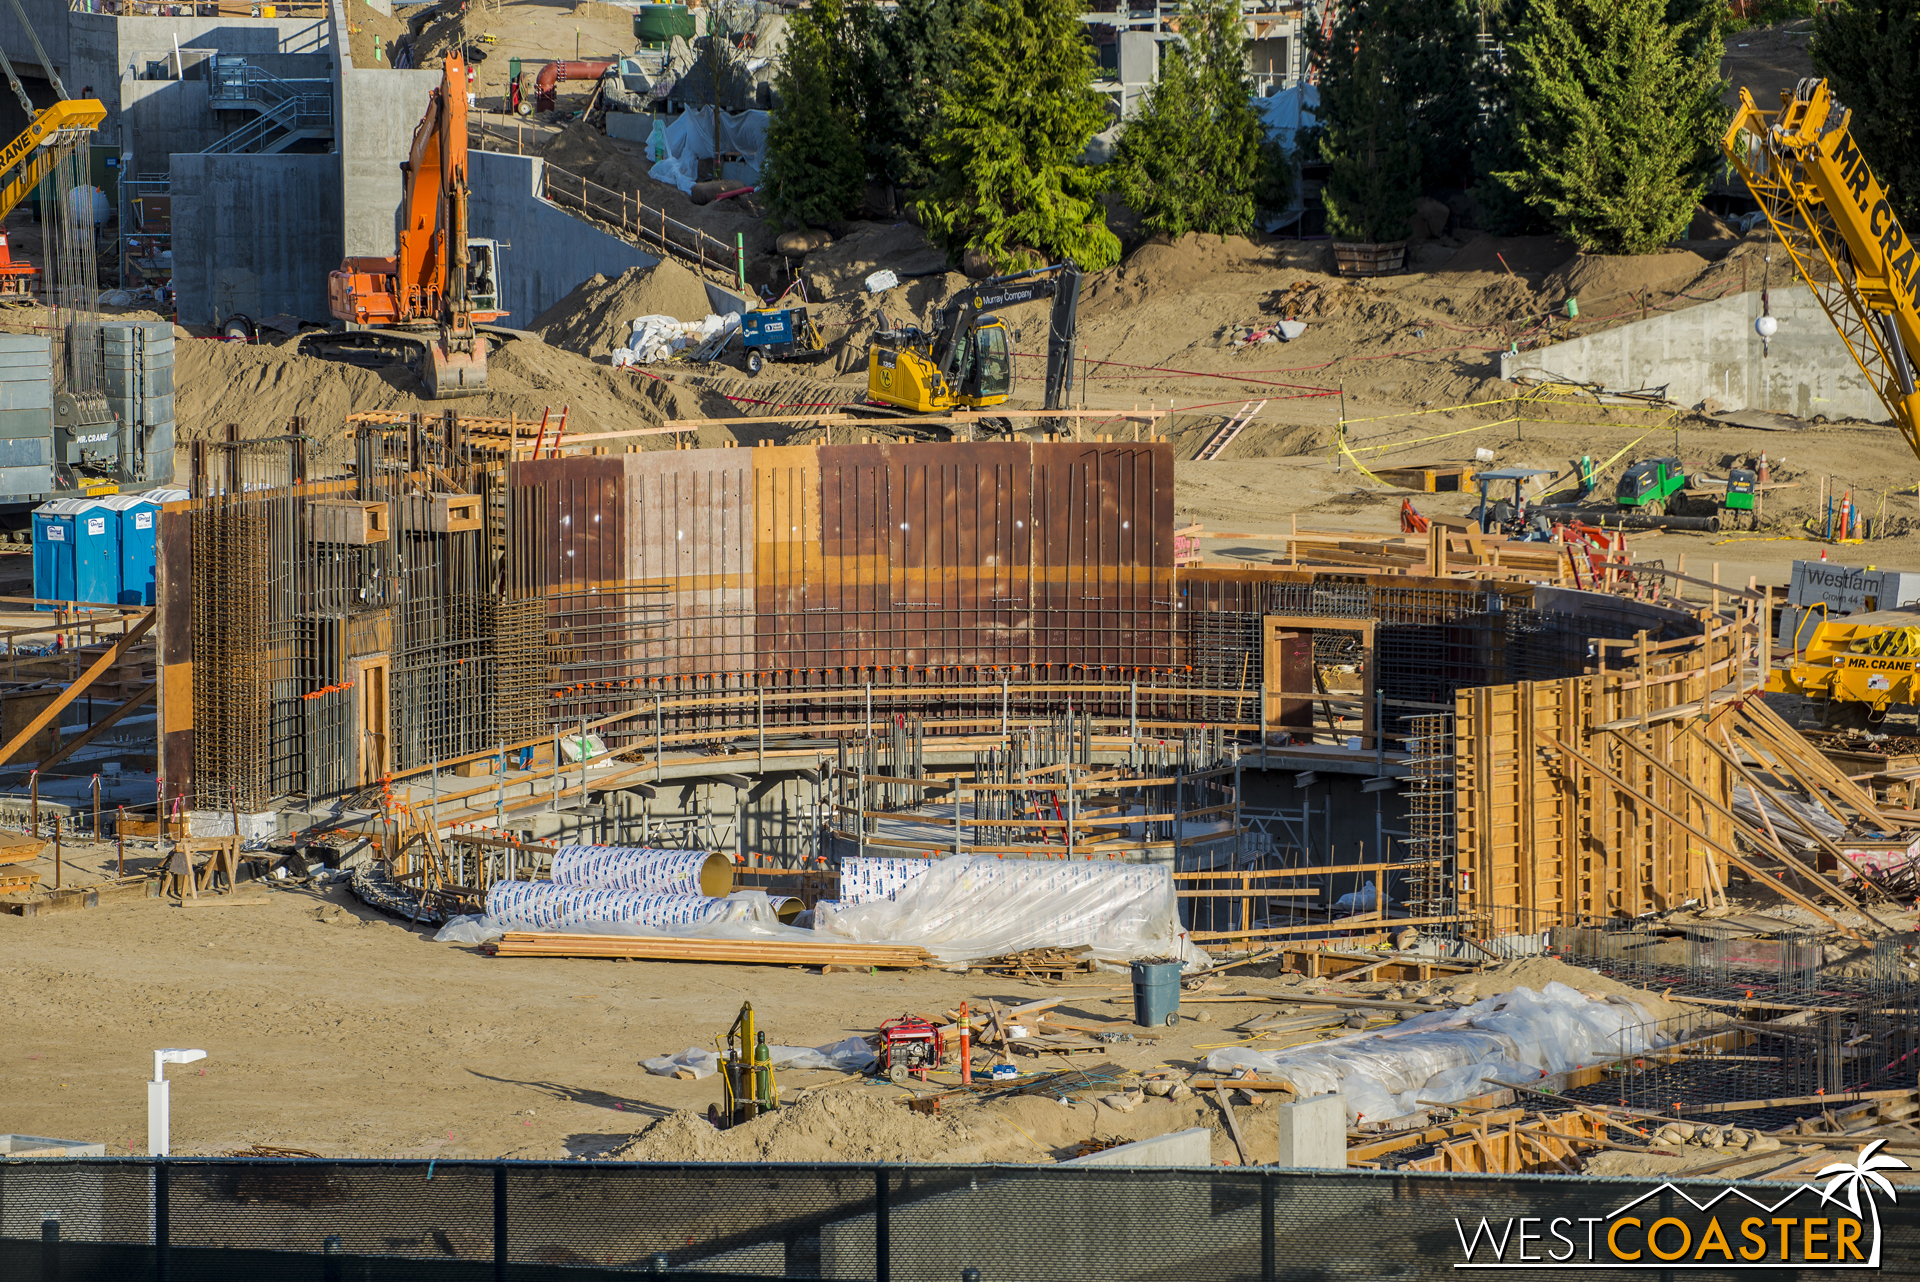  Over around the pit, more formwork continues to go up to allow further concrete pouring. 